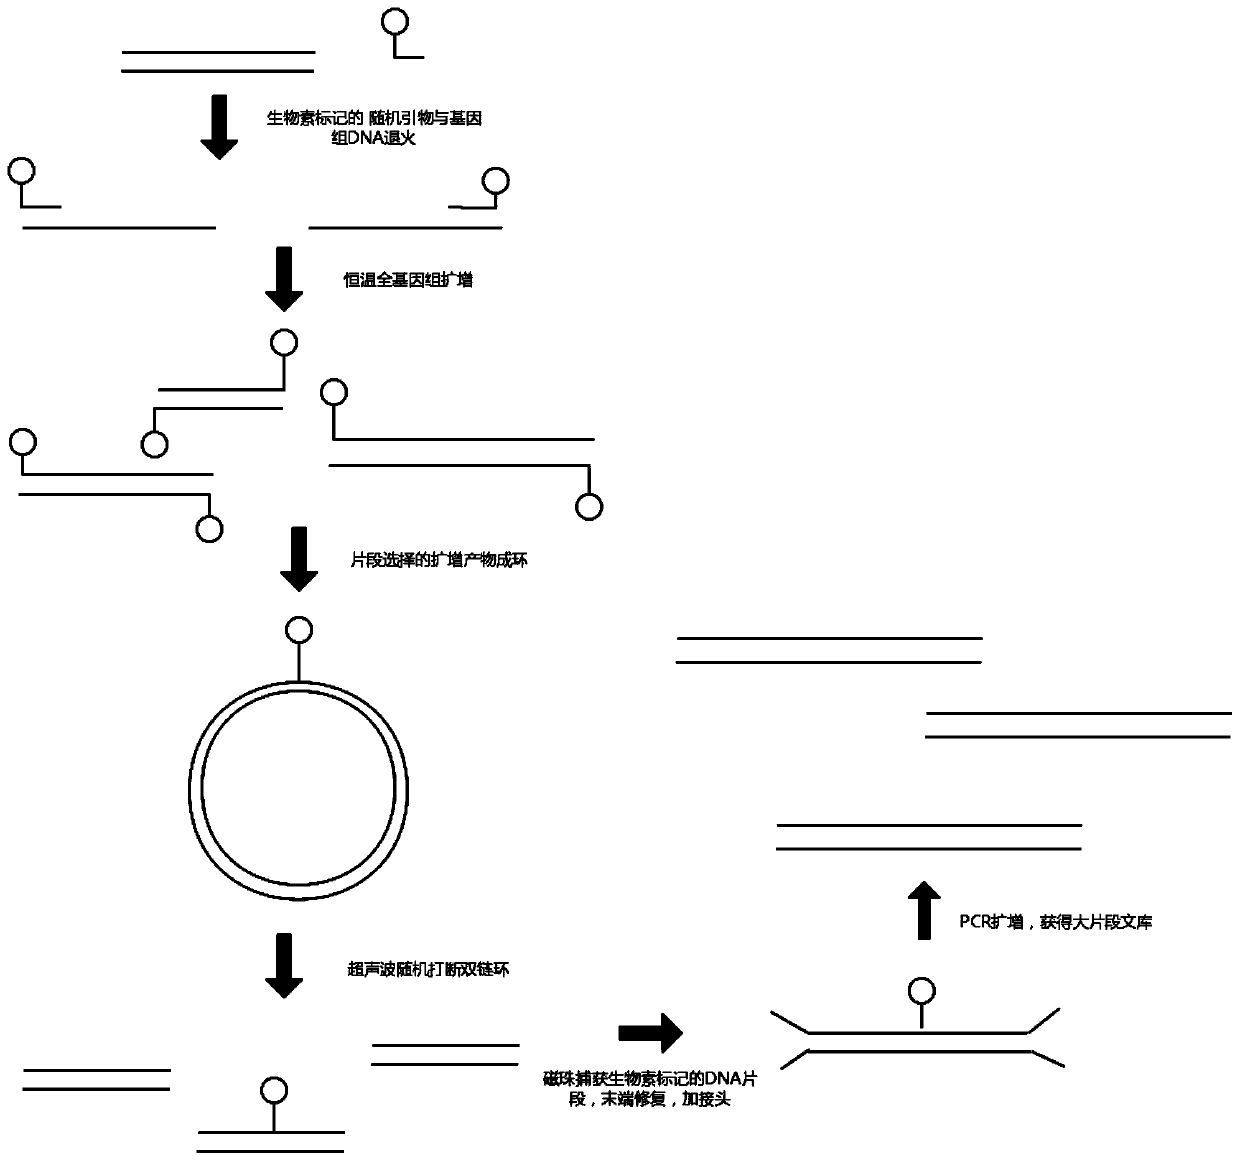 Low-initial-quantity DNA library construction method